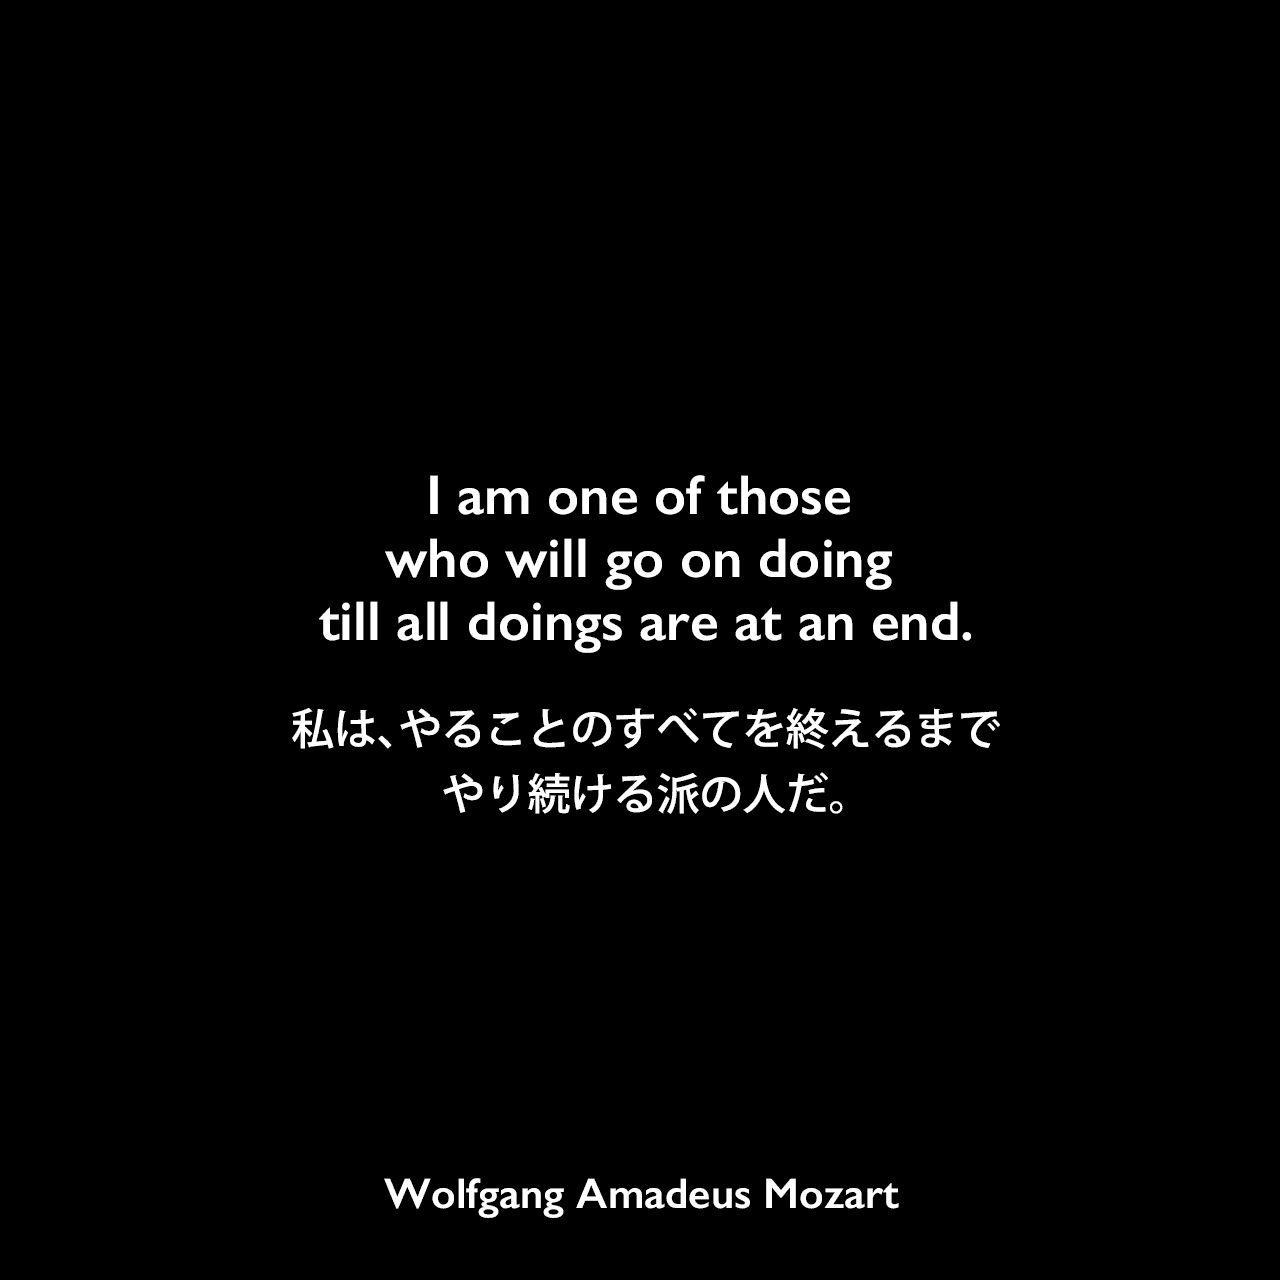 I am one of those who will go on doing till all doings are at an end.私は、やることのすべてを終えるまでやり続ける派の人だ。Wolfgang Amadeus Mozart